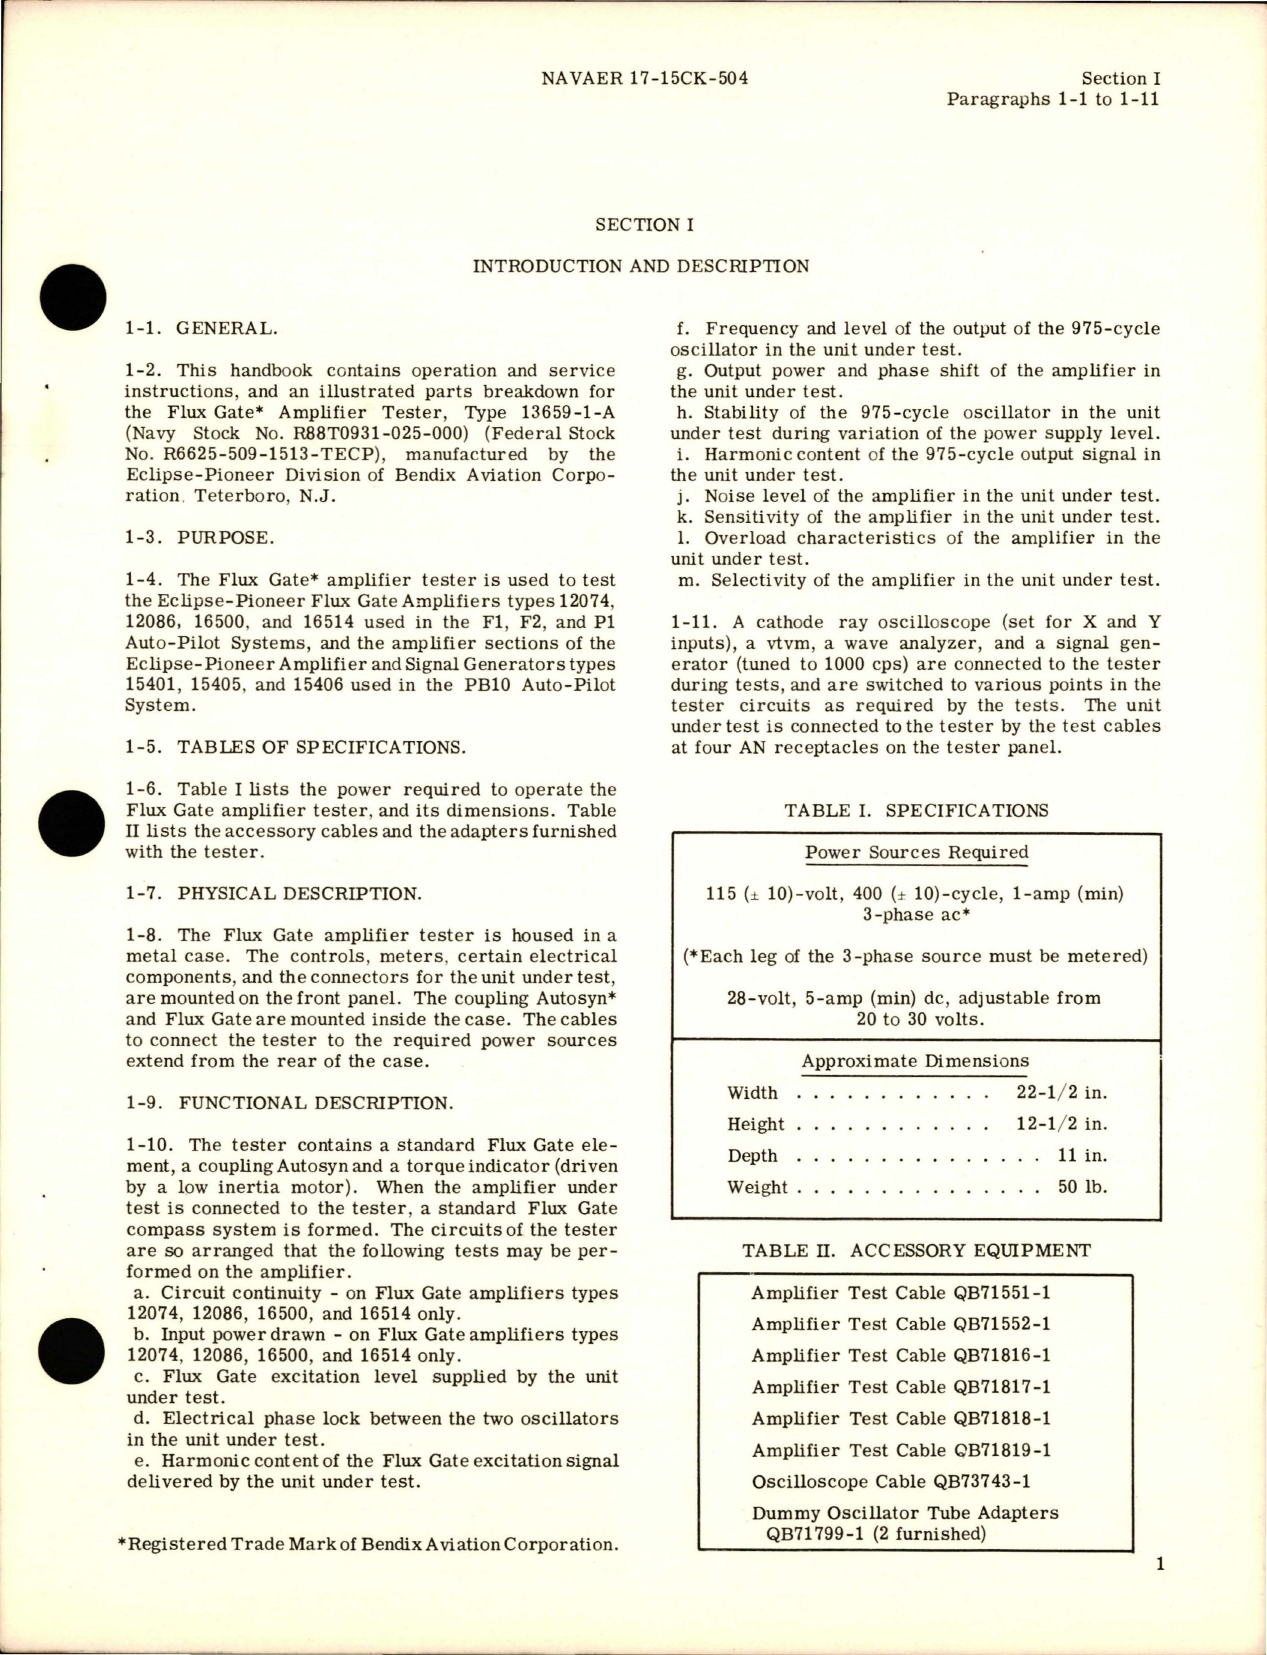 Sample page 5 from AirCorps Library document: Operation and Service Instructions with Illustrated Parts for Flux Gate Amplifier Tester - Type 13659-1-A